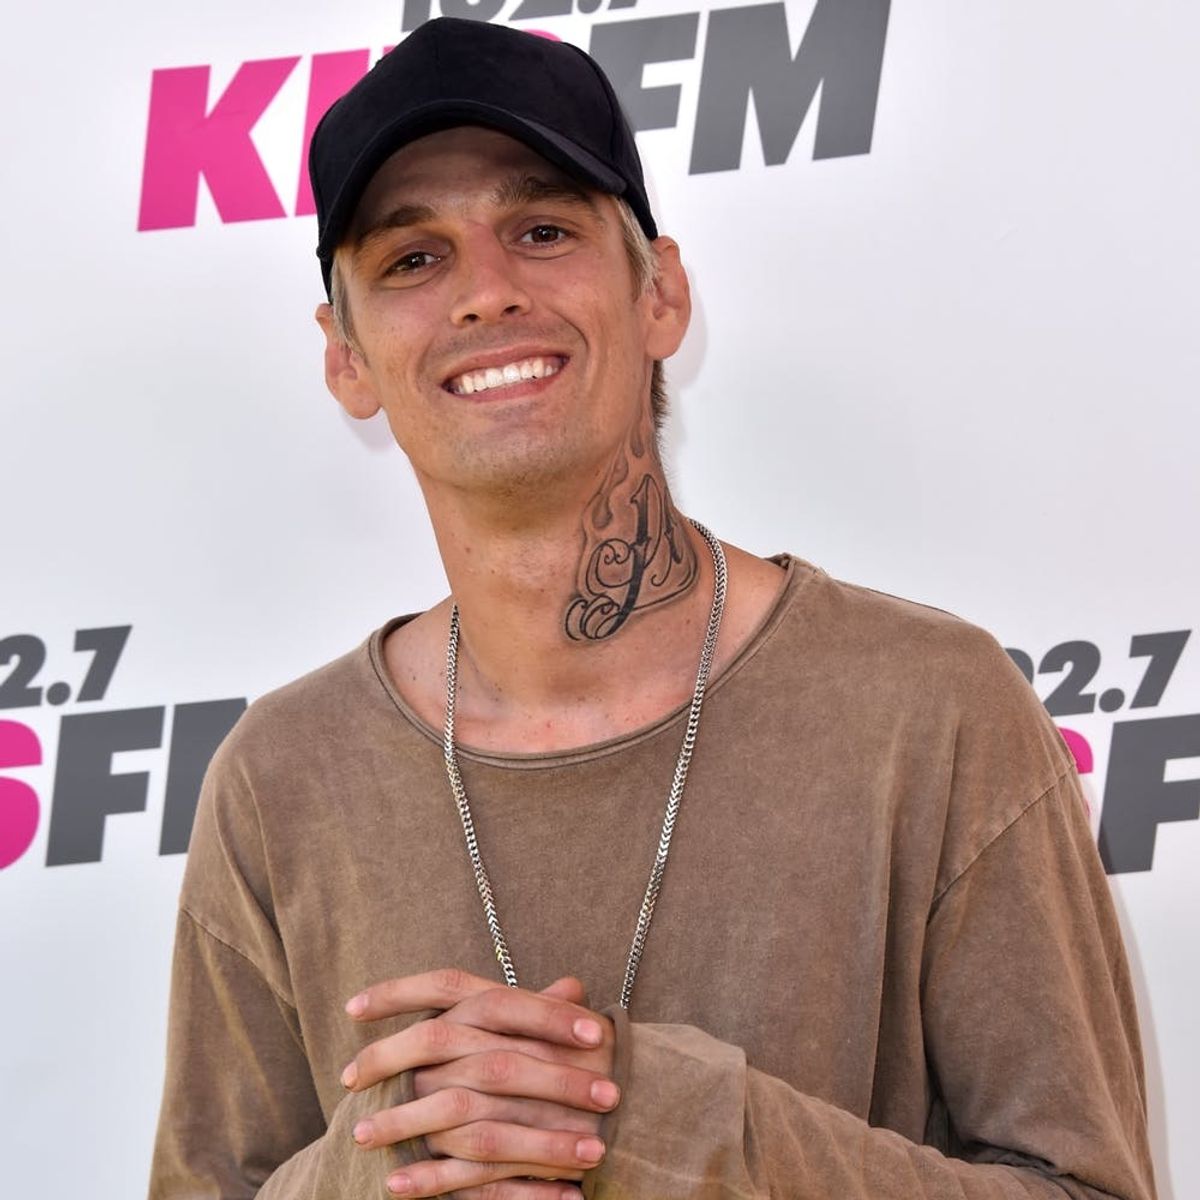 Aaron Carter Opens Up Further About His Sexuality: “I Can’t Live a Lie”